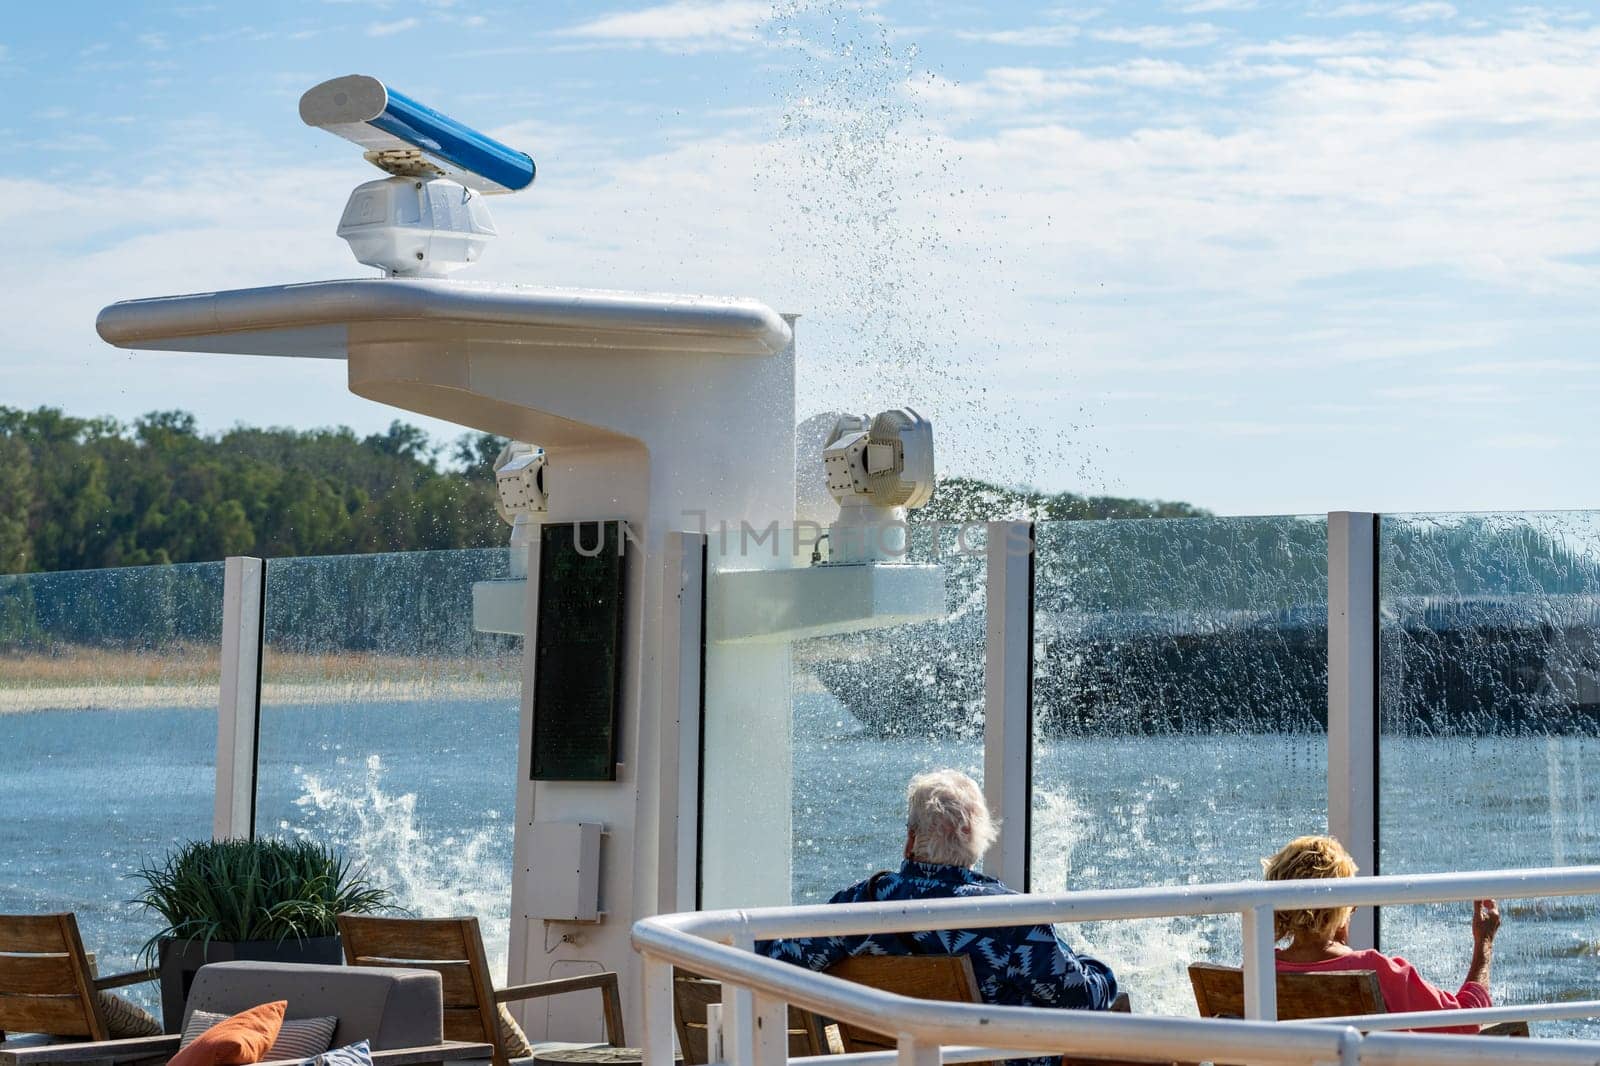 Spray and wave from passing freight barge creates splash onto deck of a modern Mississippi river cruise boat